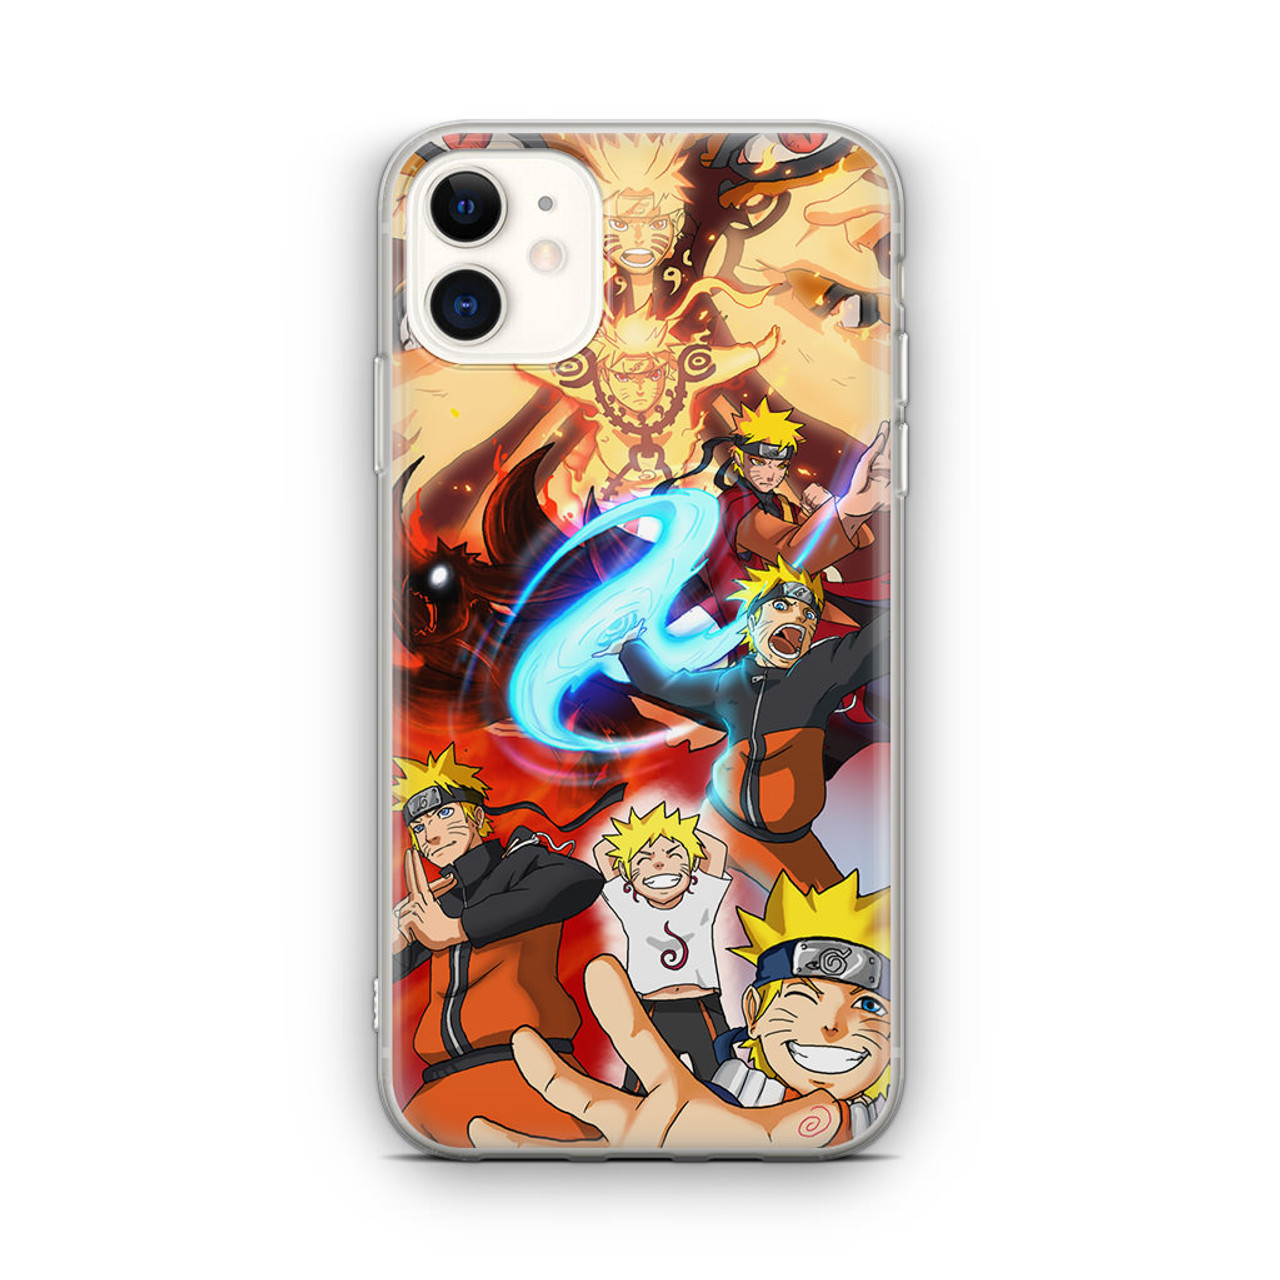 I Love Anime OTAKU LIFE Custom made Case/Cover/Skin for iPhone 6 - Black -  Rubber Case (Ships from CA) : Buy Online at Best Price in KSA - Souq is now  Amazon.sa: Electronics